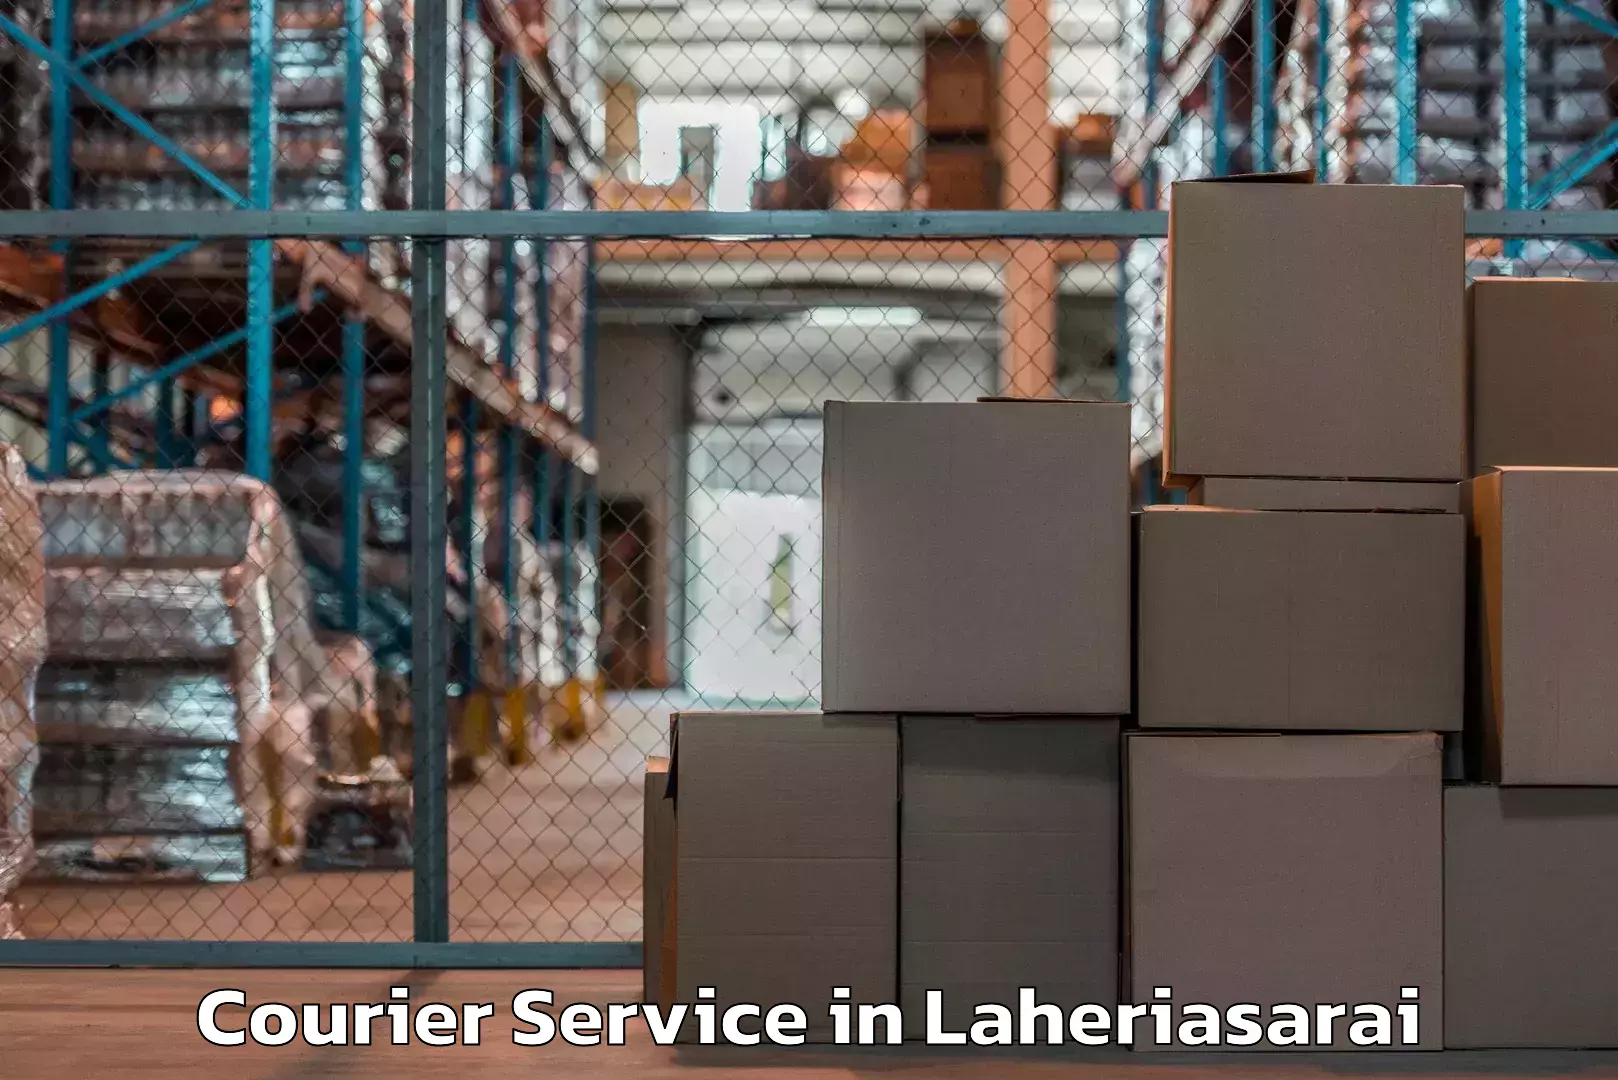 Integrated courier services in Laheriasarai